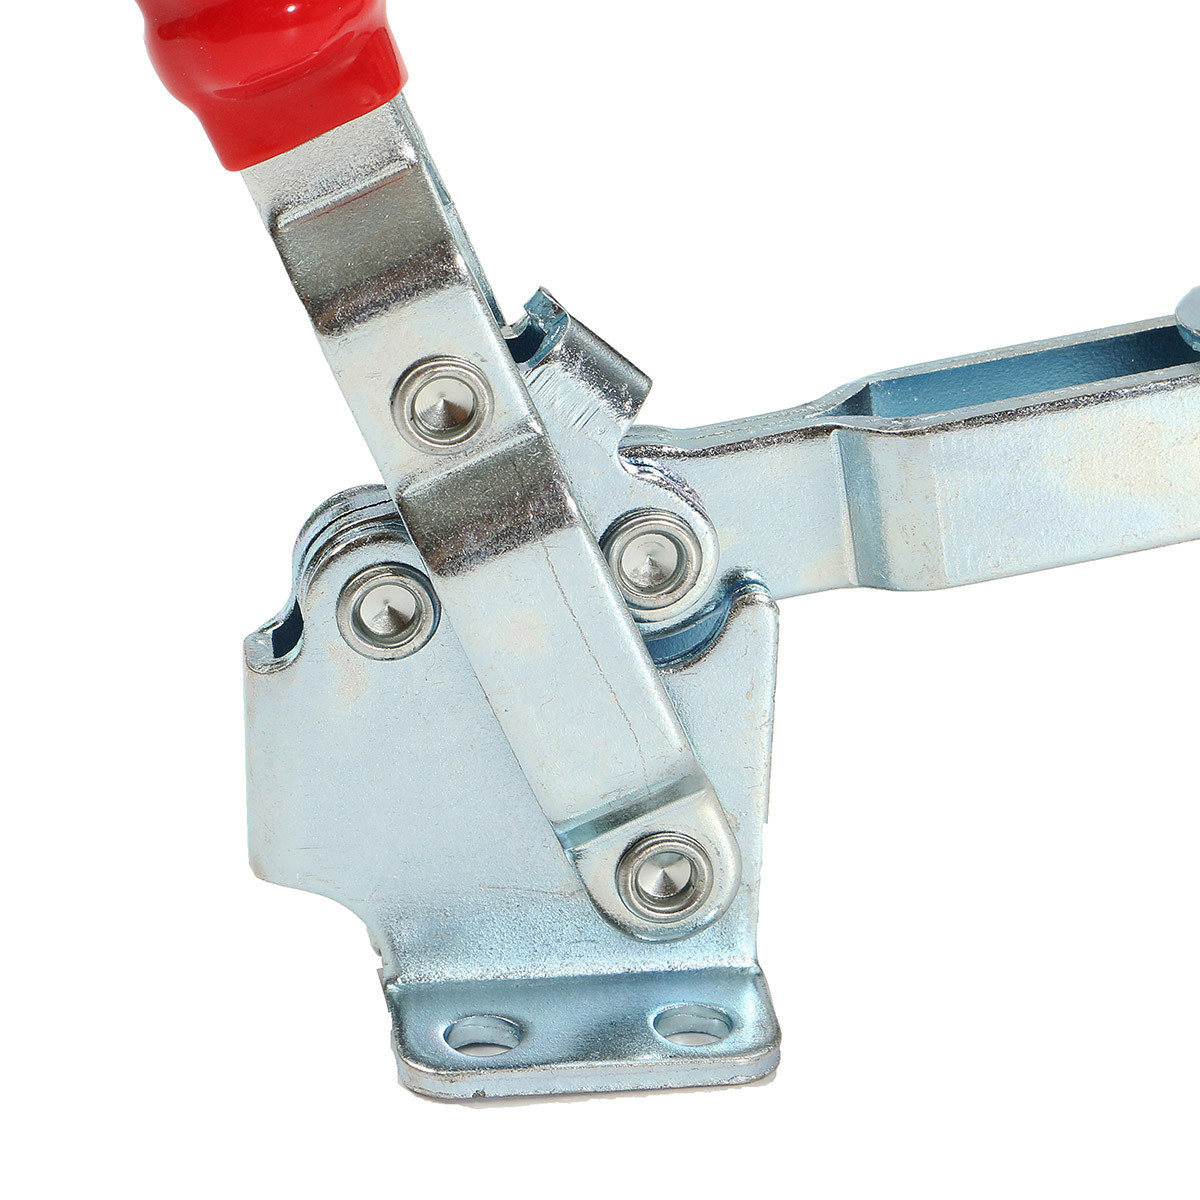 227KG-Holding-Capacity-Quick-Release-U-Bar-Hand-Tool-Vertical-Type-Toggle-Clamp-1103853-7